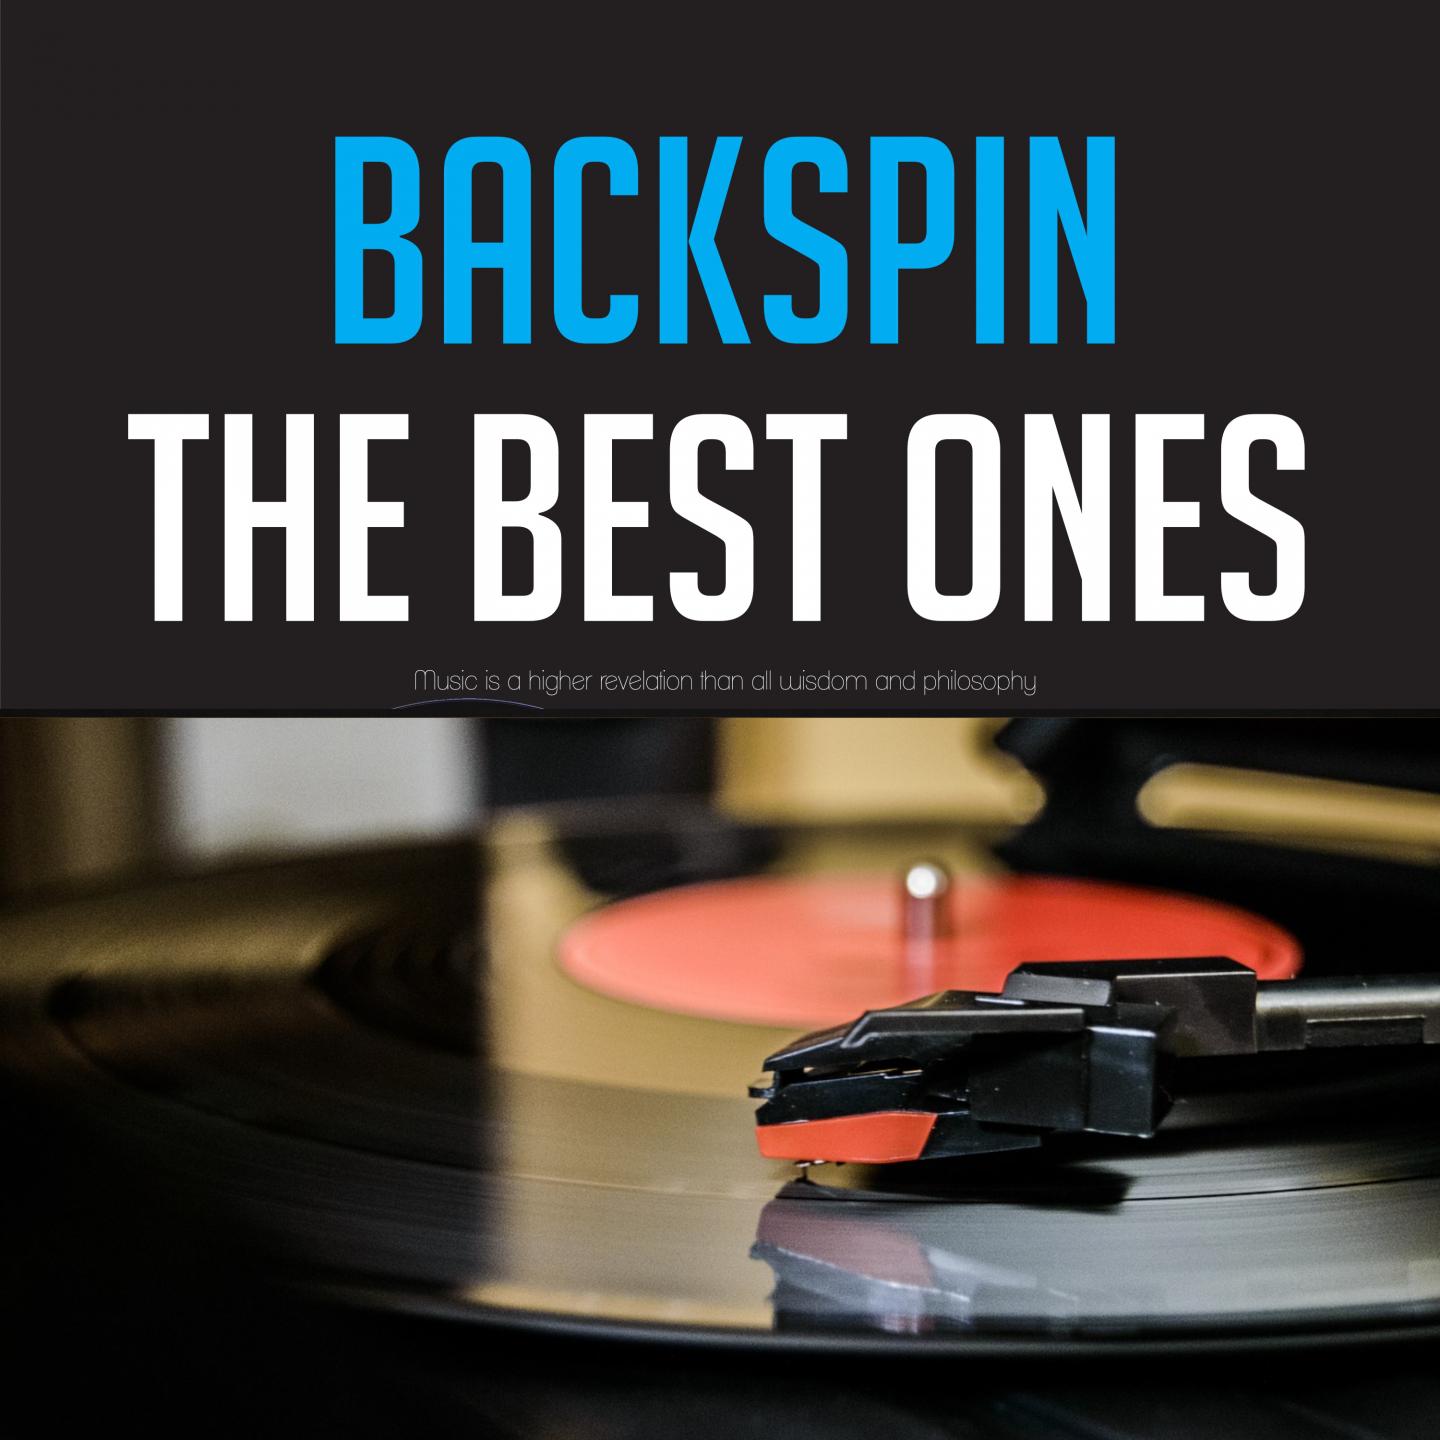 Backspin the Best Ones